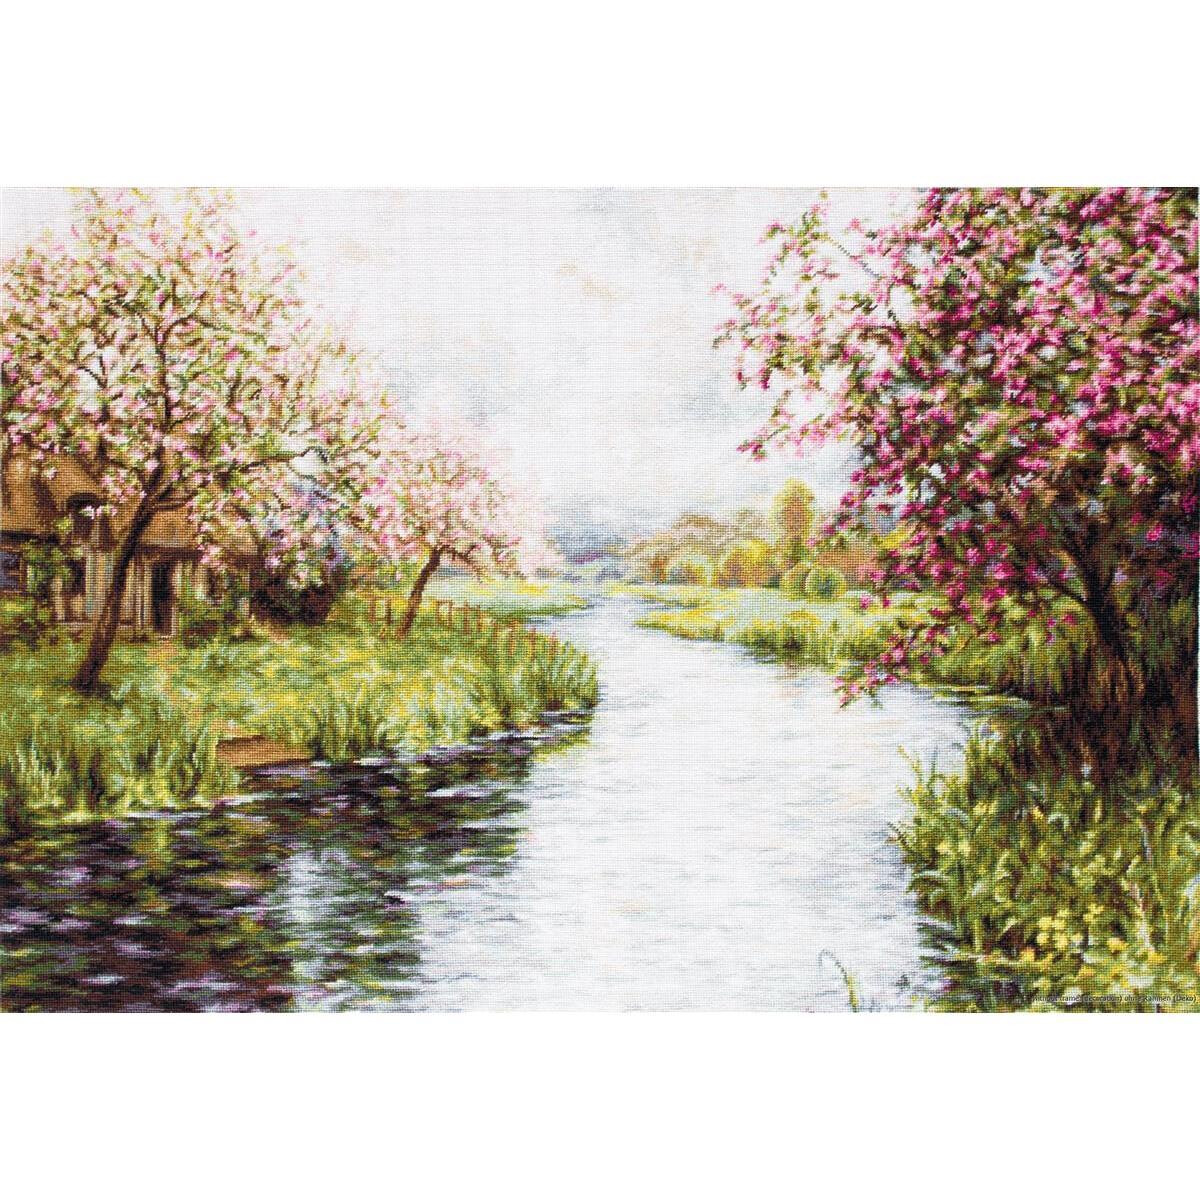 Luca-S counted Cross Stitch kit "Spring...